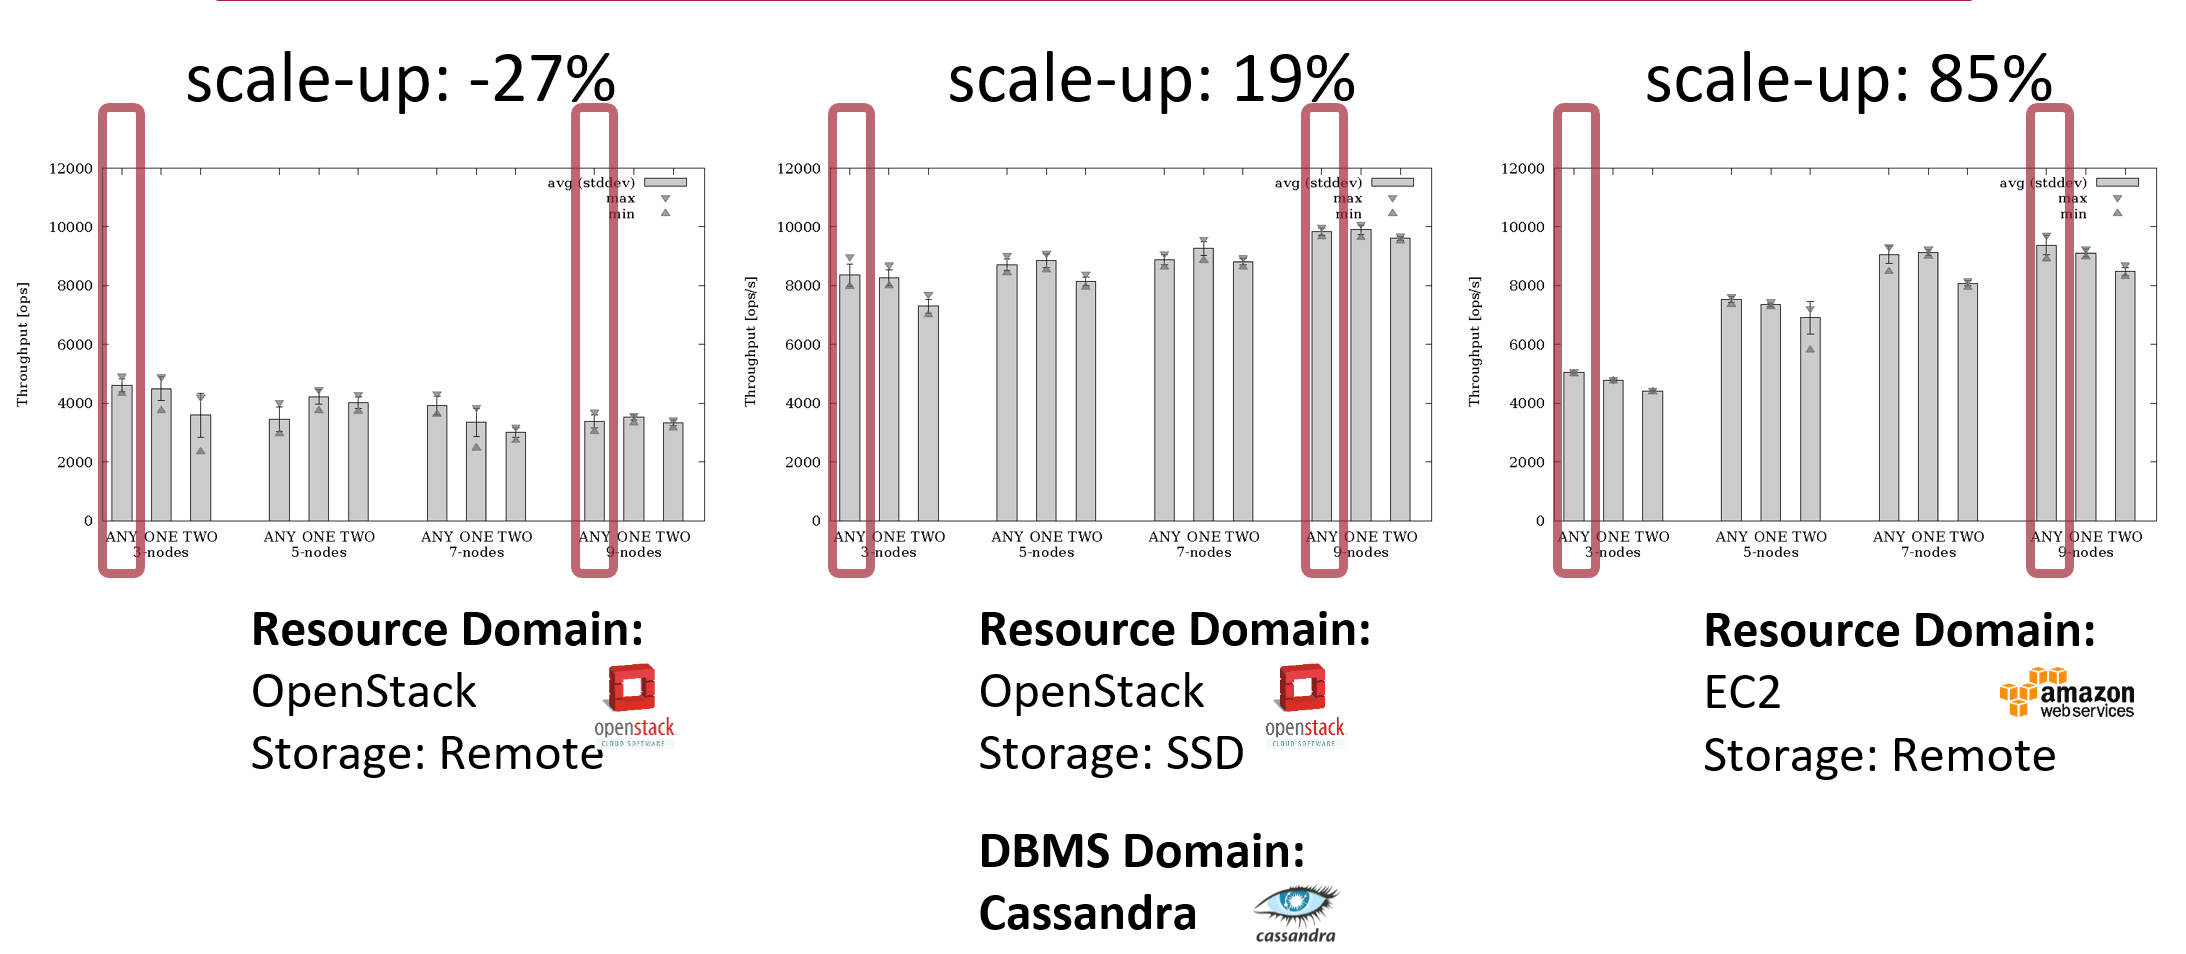 Cloud database benchmarking results on different cloud providers